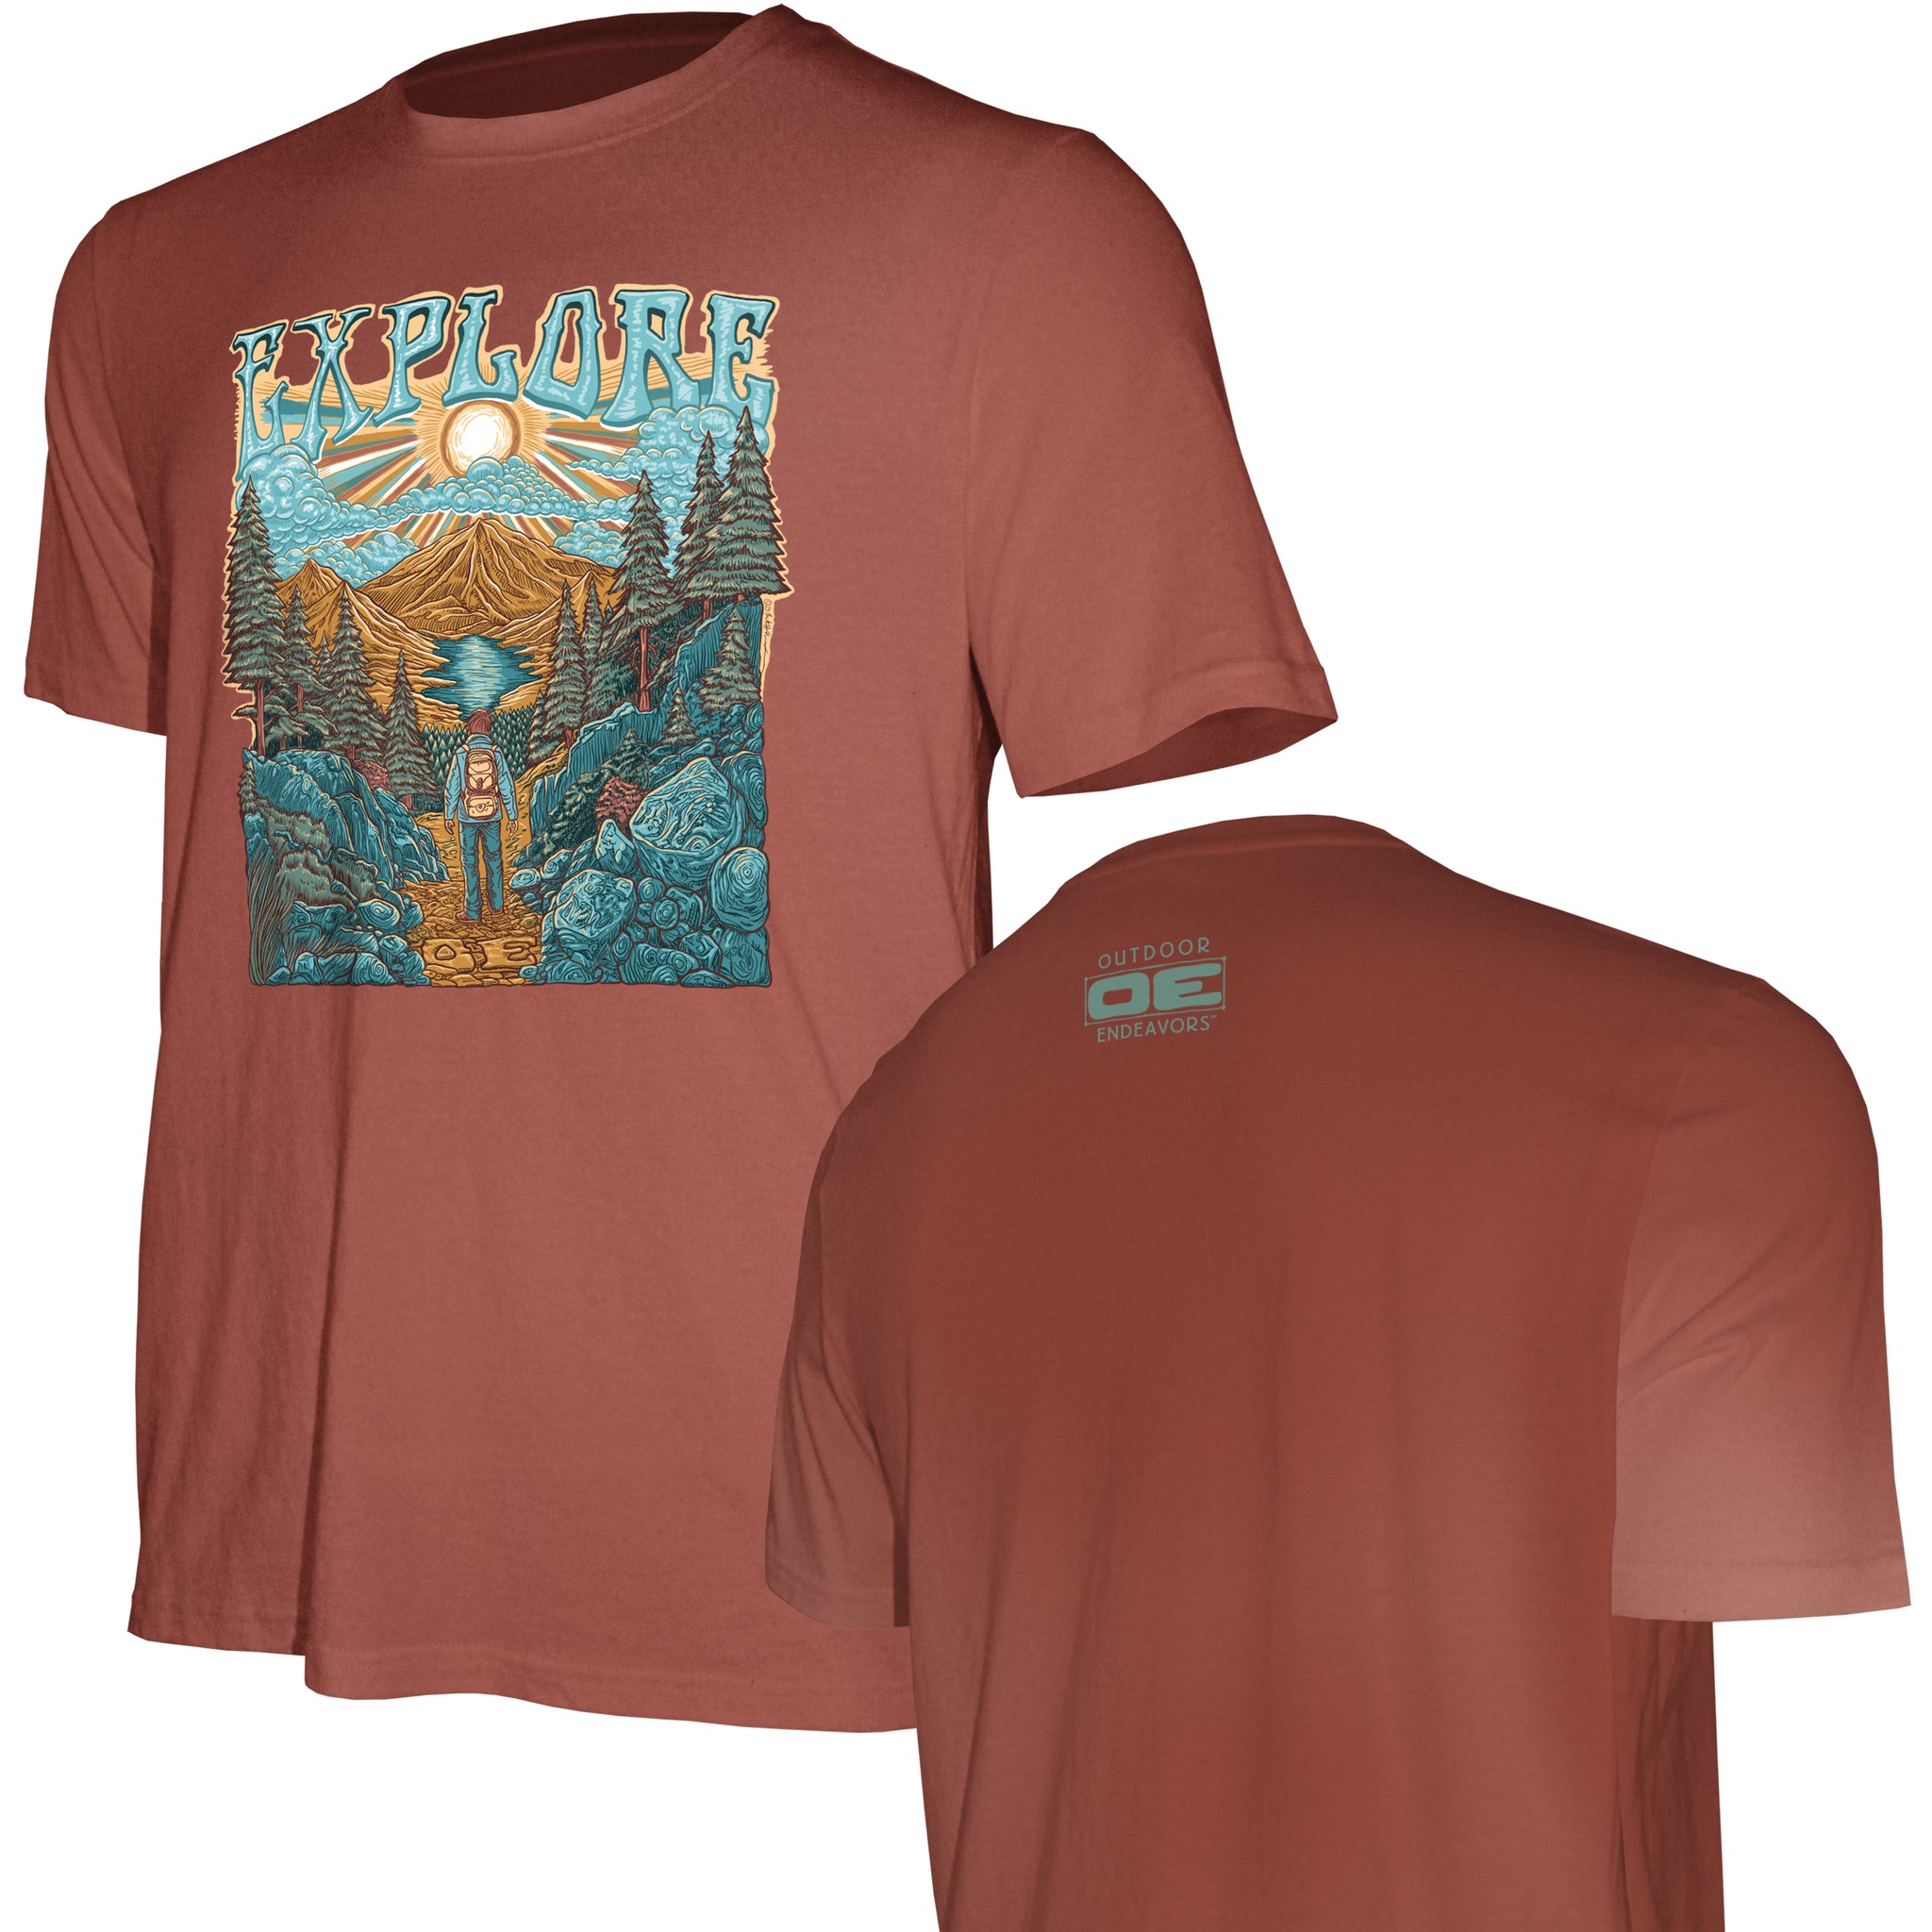 Copy of Outdoor Endeavors Out There- American Made Tee - EXPLORE FRONT